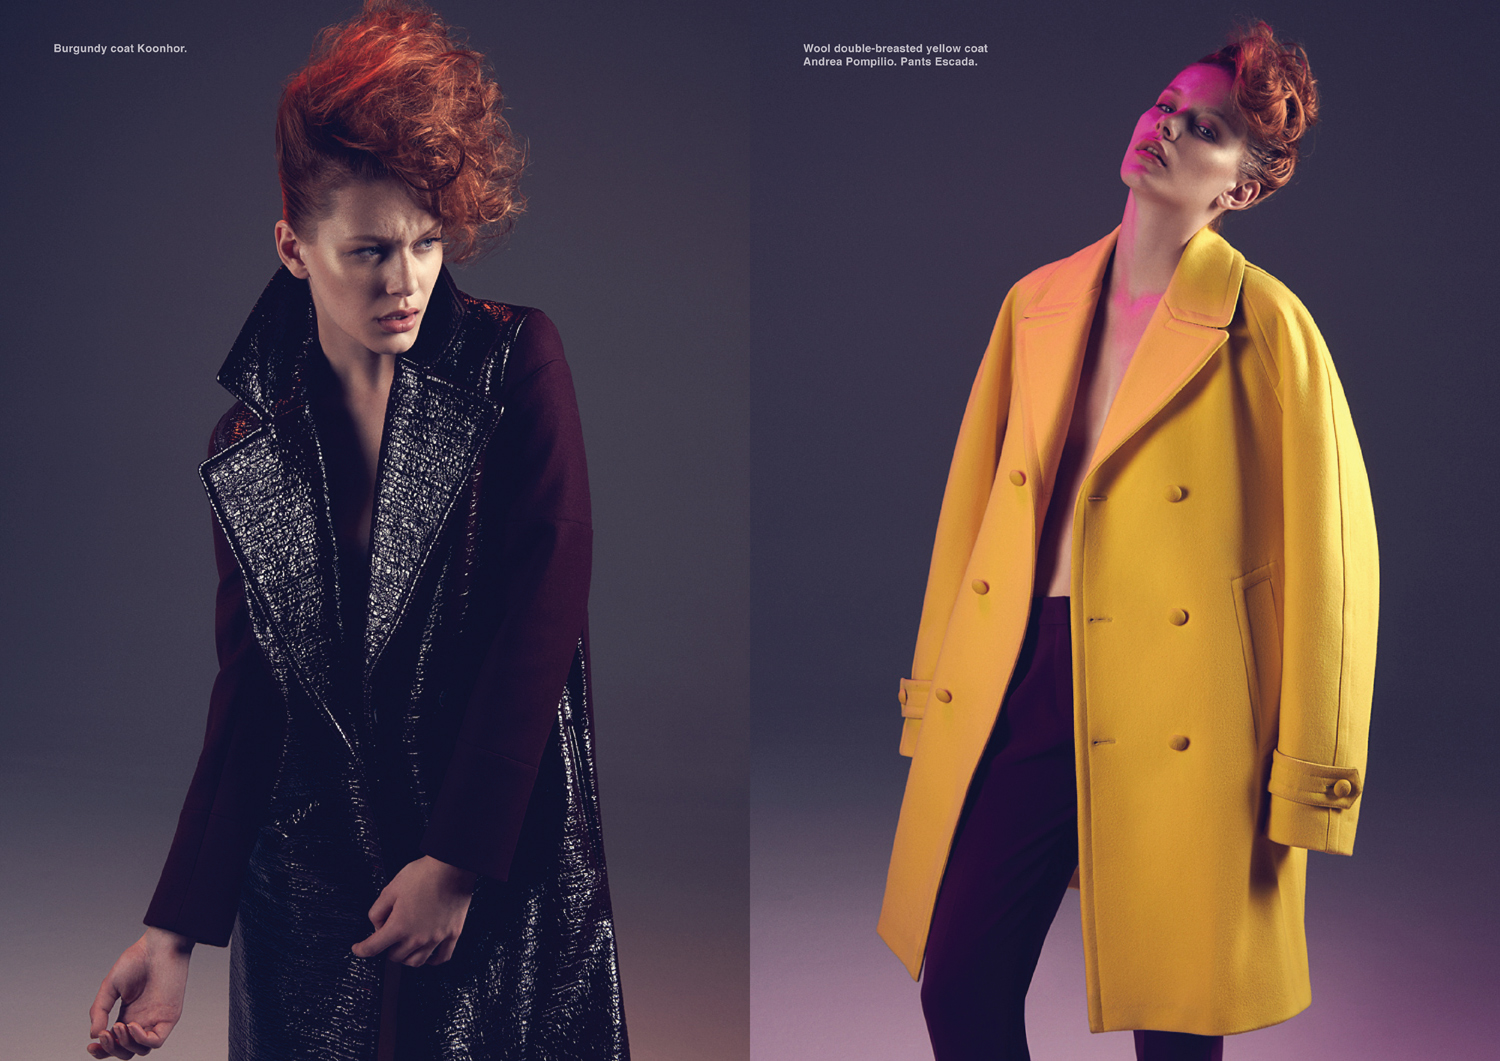 Left page, burgundy coat Koonhor. Right page, wool double-breasted yellow coat Andrea Pompilio. Pants Escada.